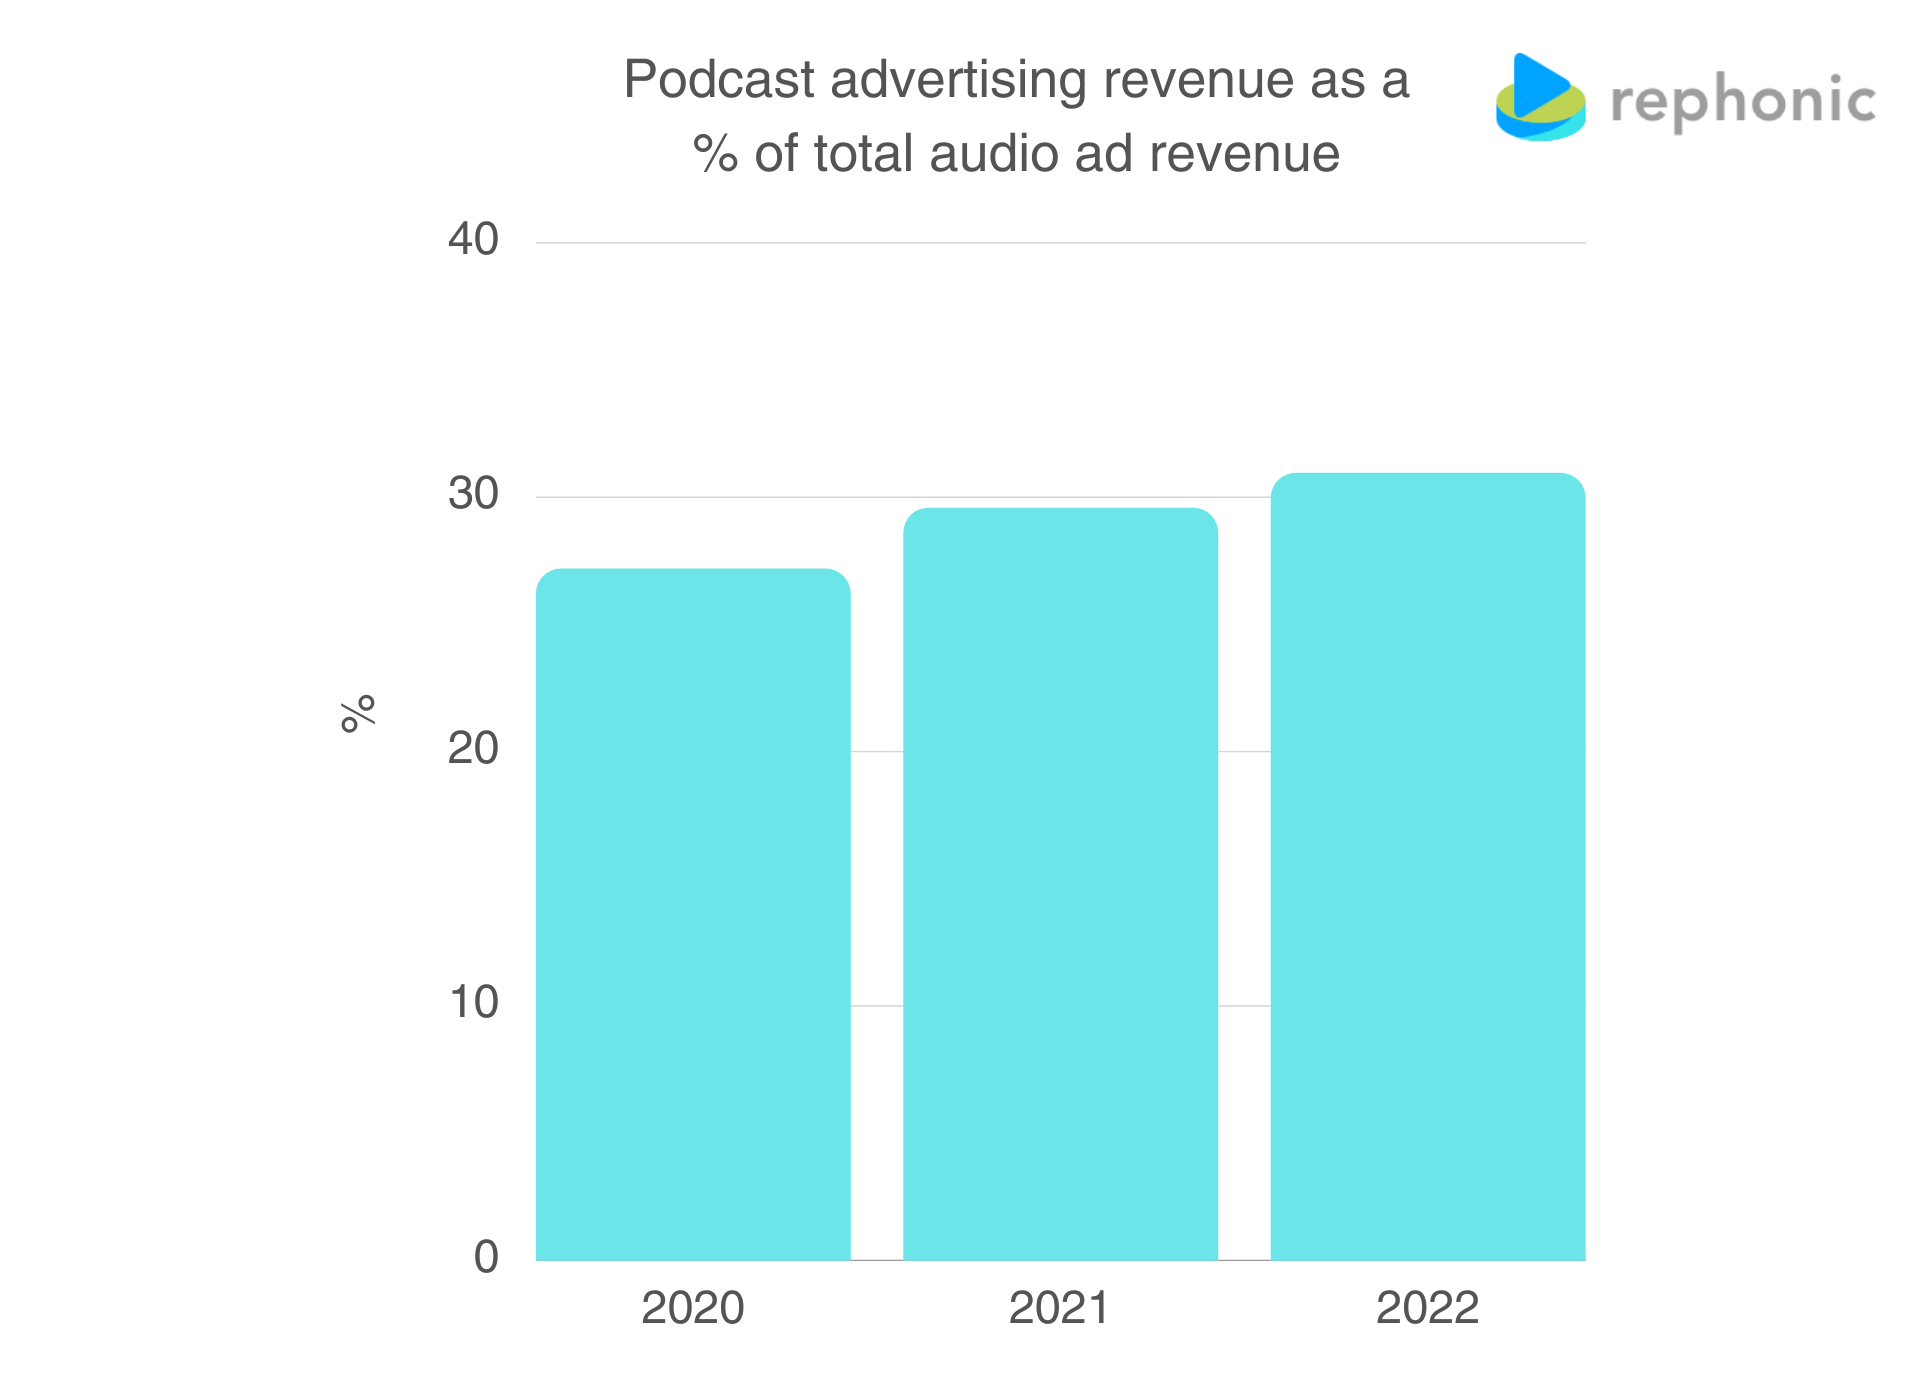 US podcast advertising revenue as a % of total audio ad revenue